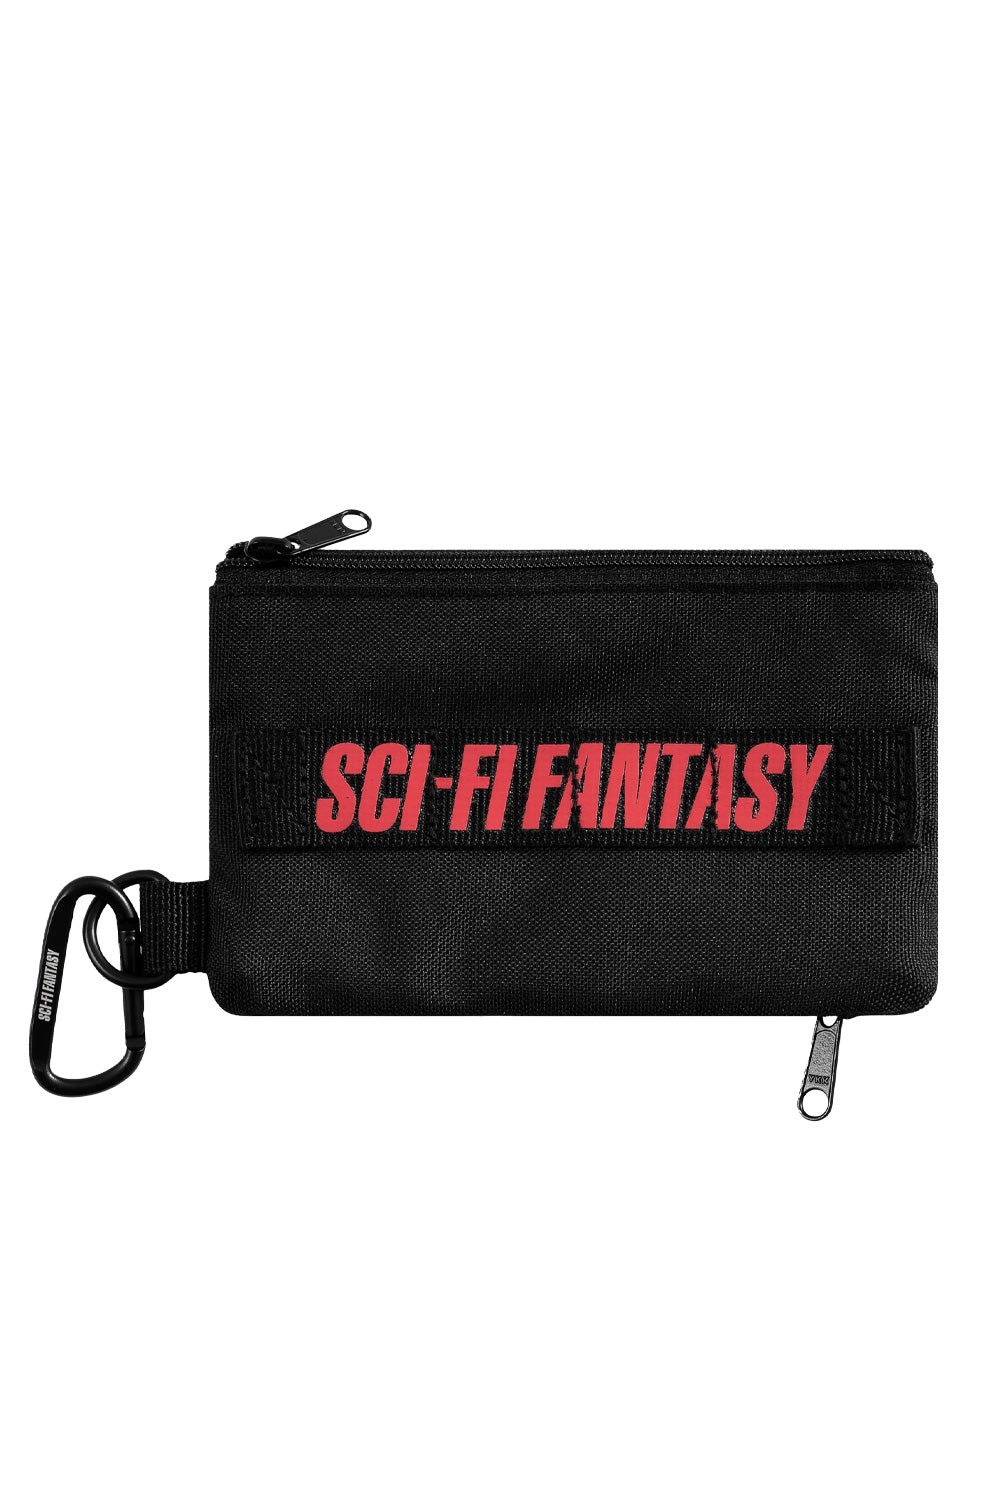 Sci-Fi Fantasy Carry-All Pouch Black - BONKERS